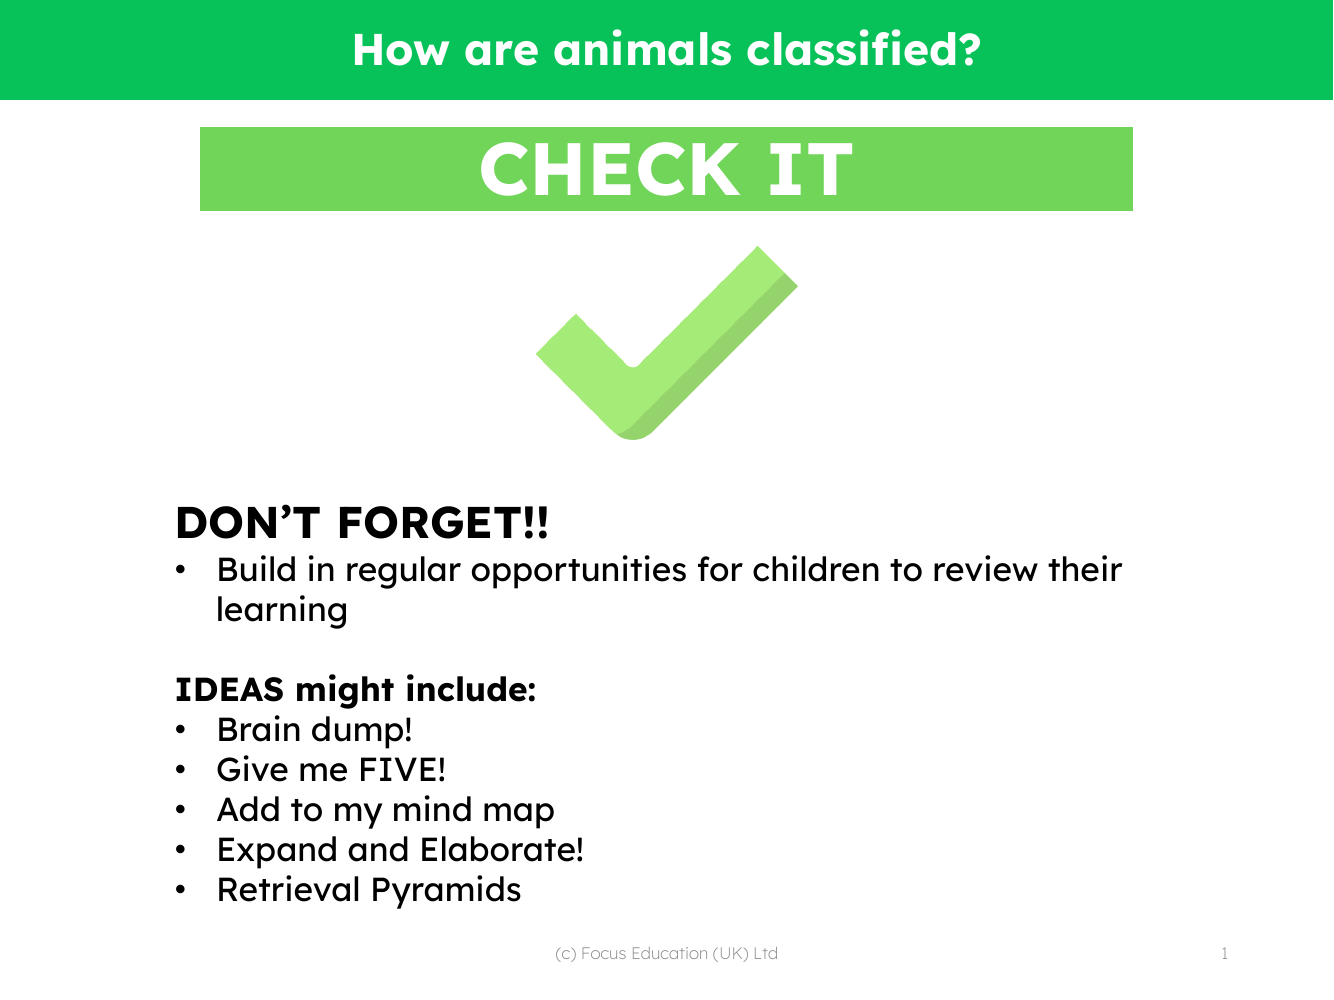 Check it! - How are Animals Classified - Kindergarten